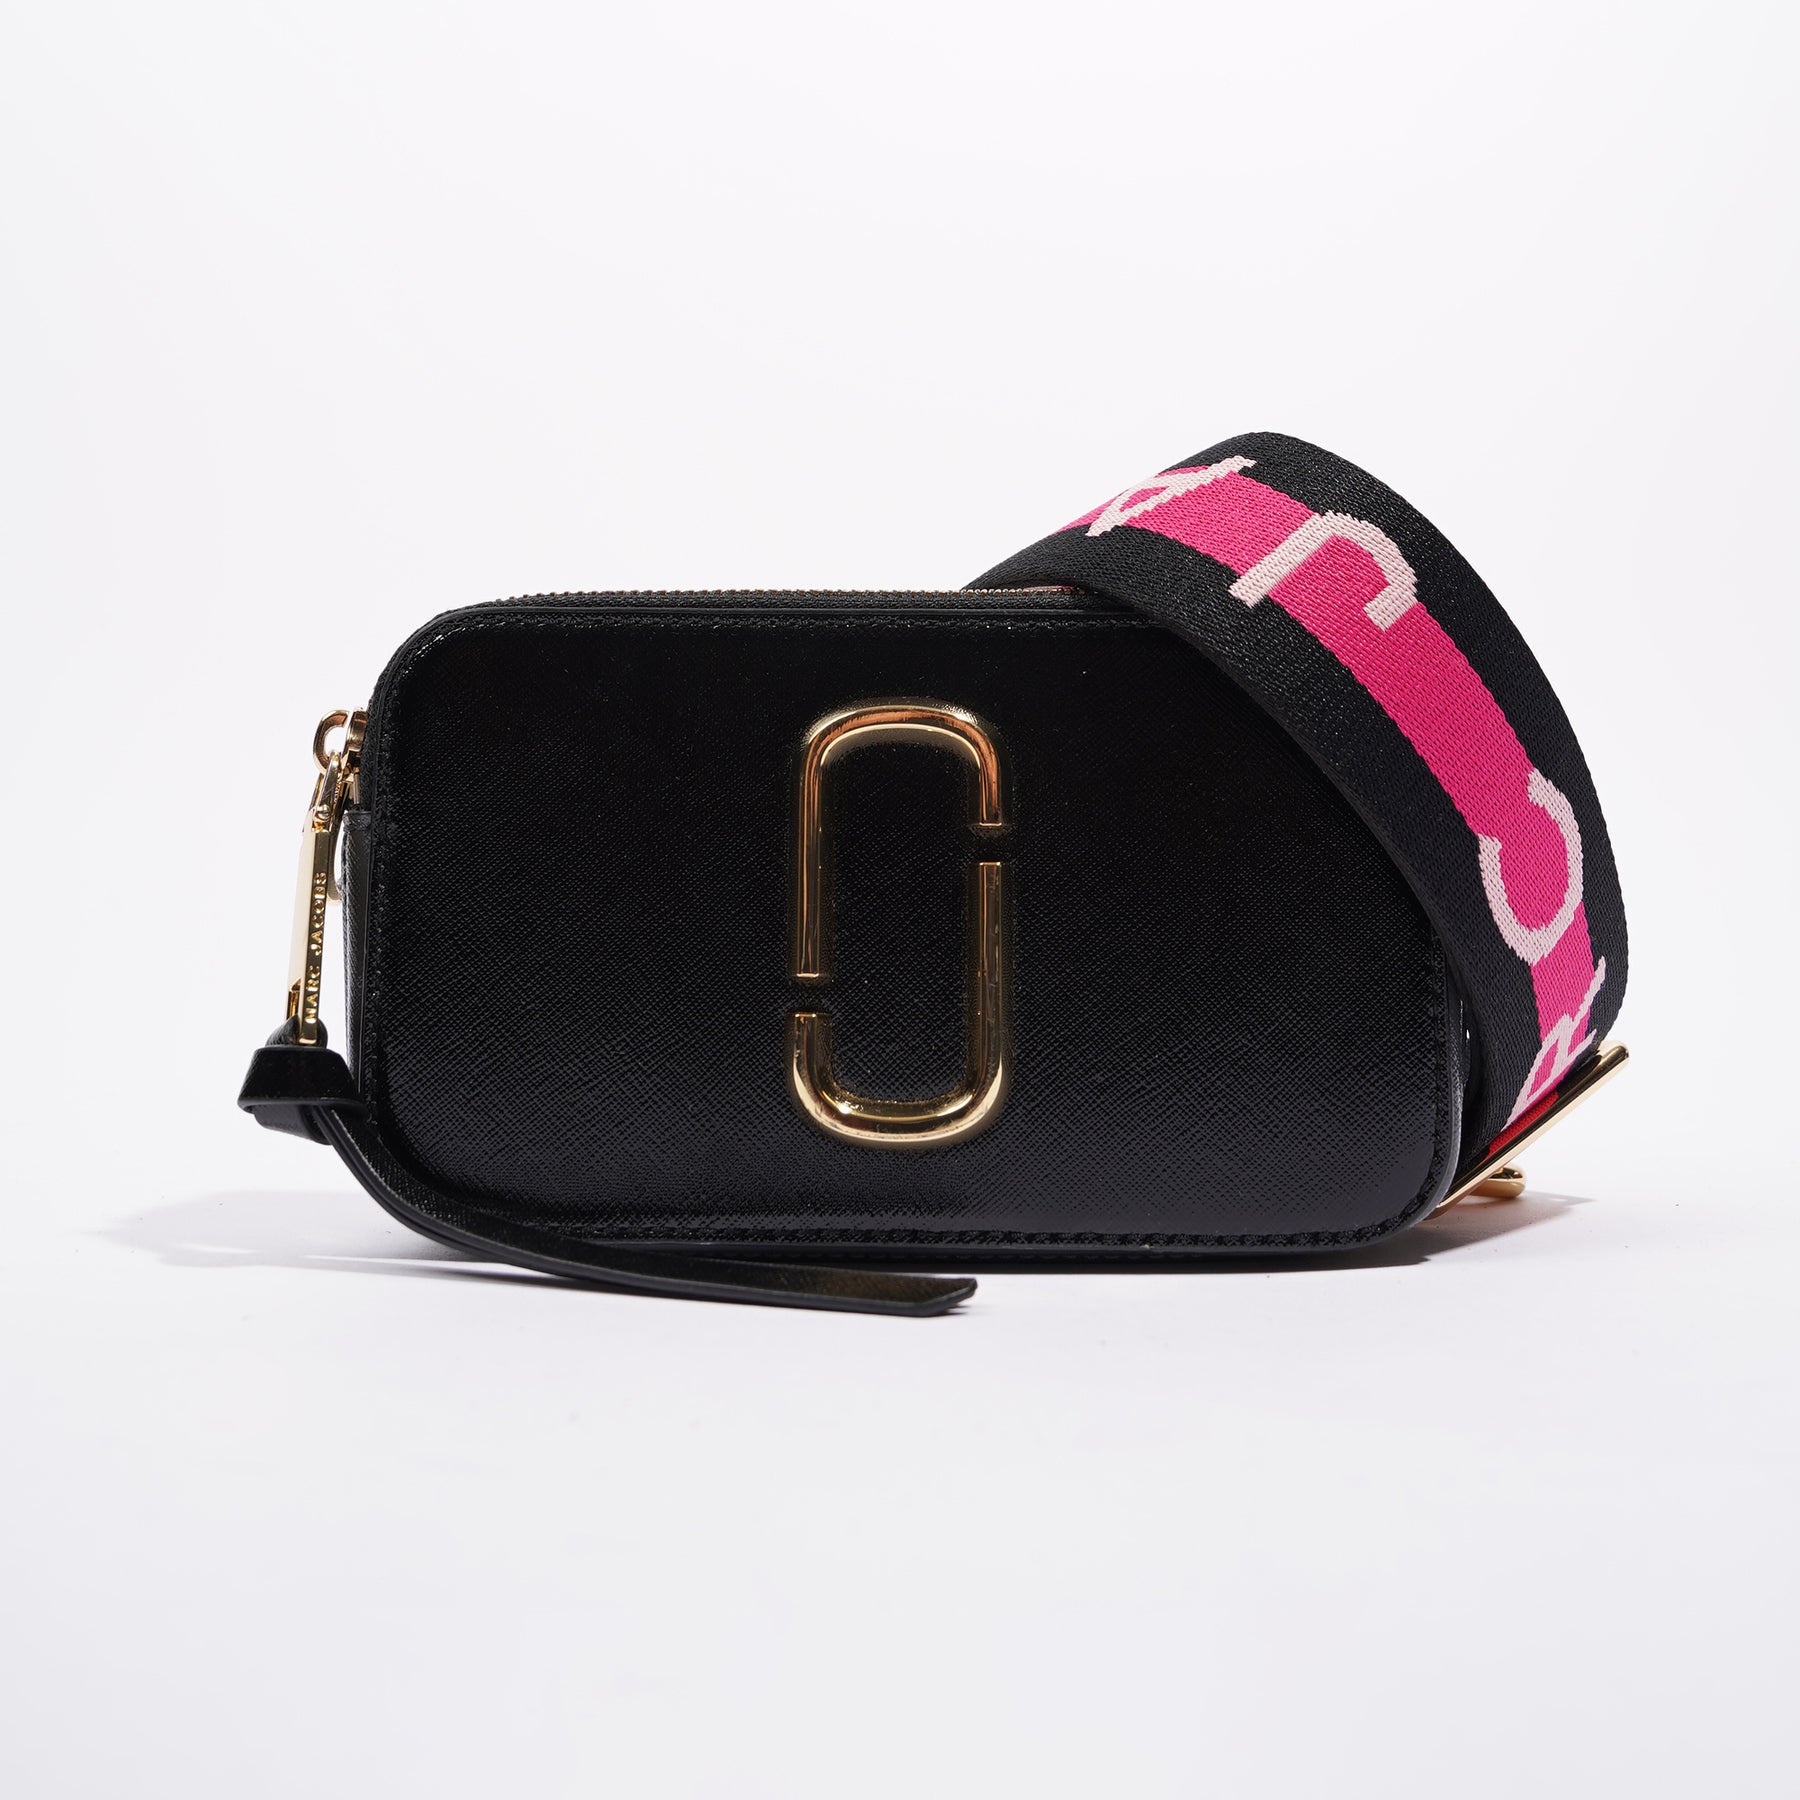 Cross body bags Marc Jacobs - Snapshot small black leather bag - M0014146002